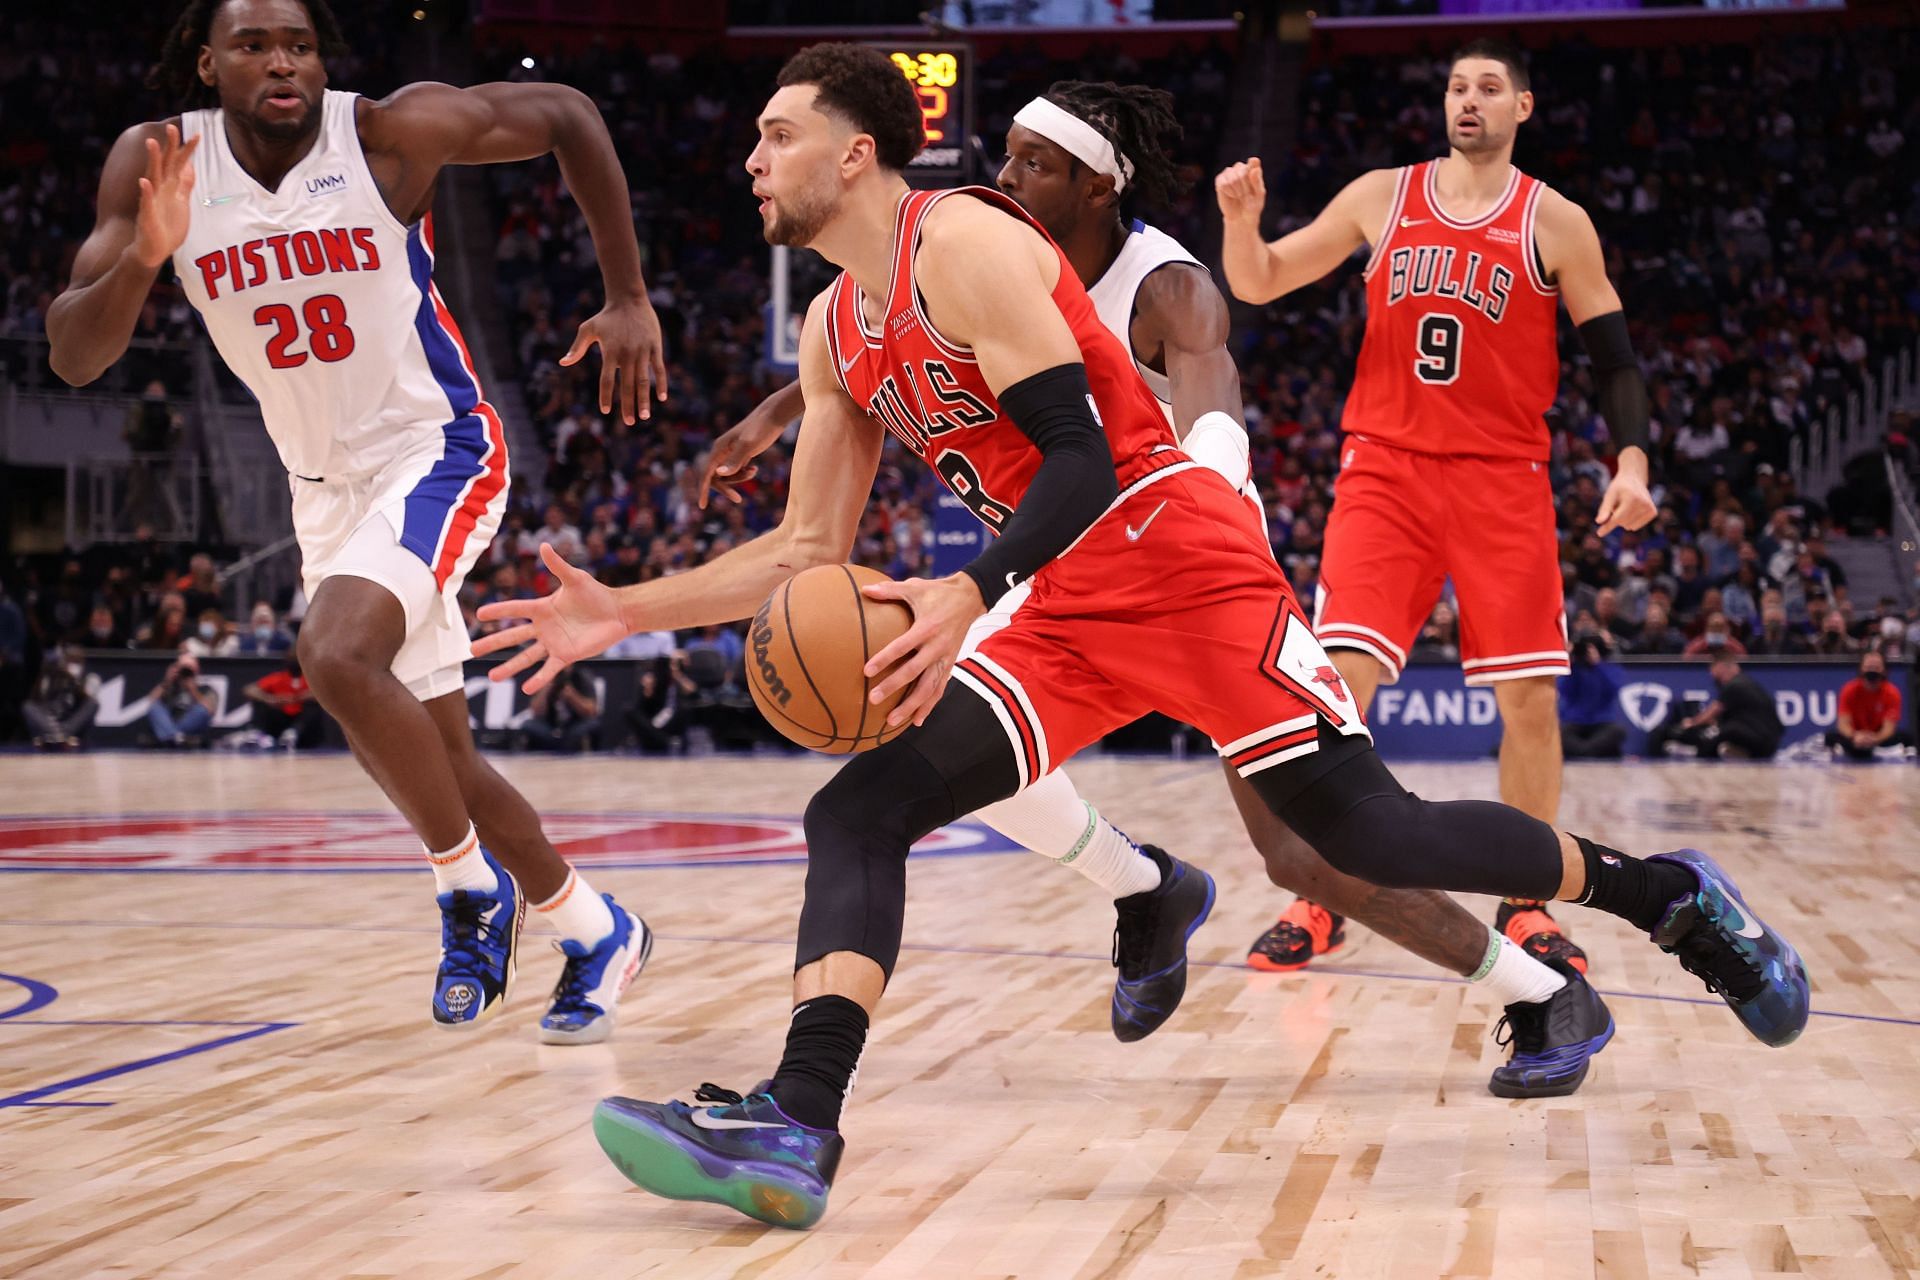 The Chicago Bulls unexpectedly had to eke out a win against the Detroit Pistons.